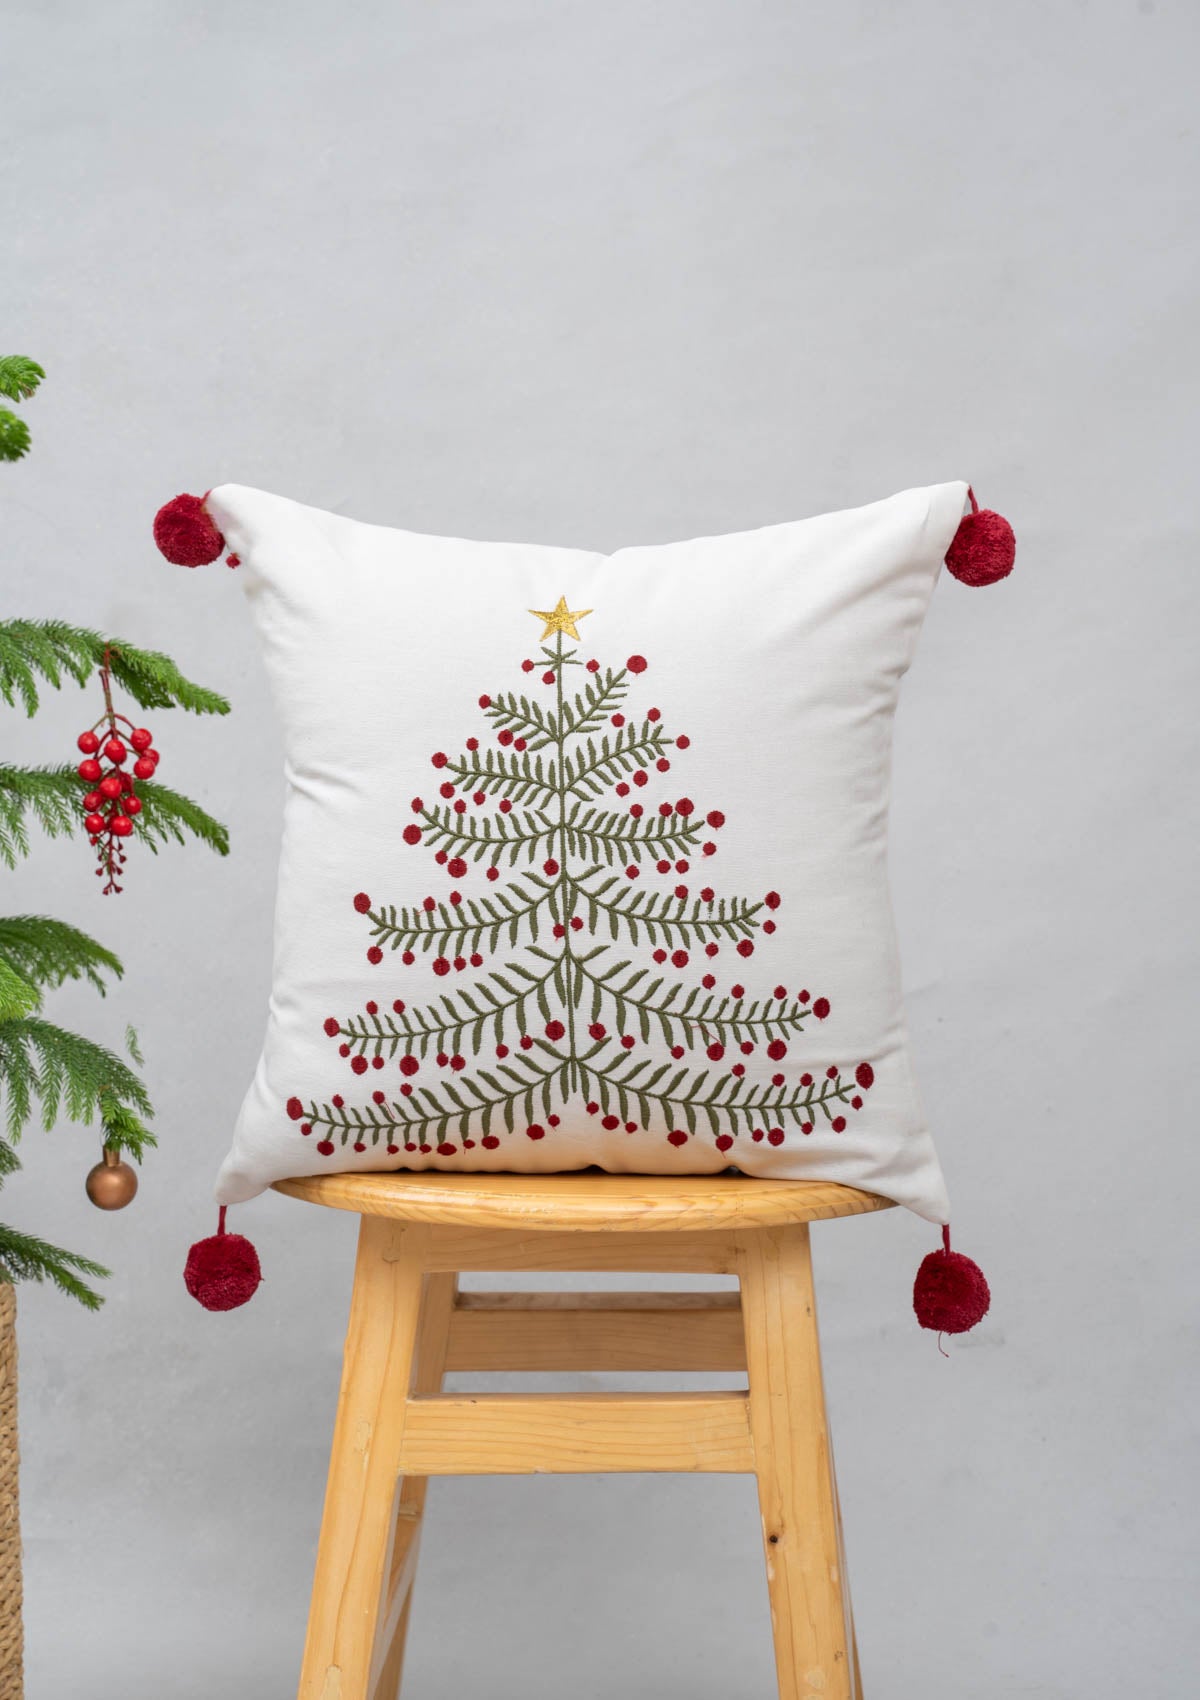 Starlit Cushion 100% cotton embroidered cushion cover for sofa with red pom pom - Multicolor